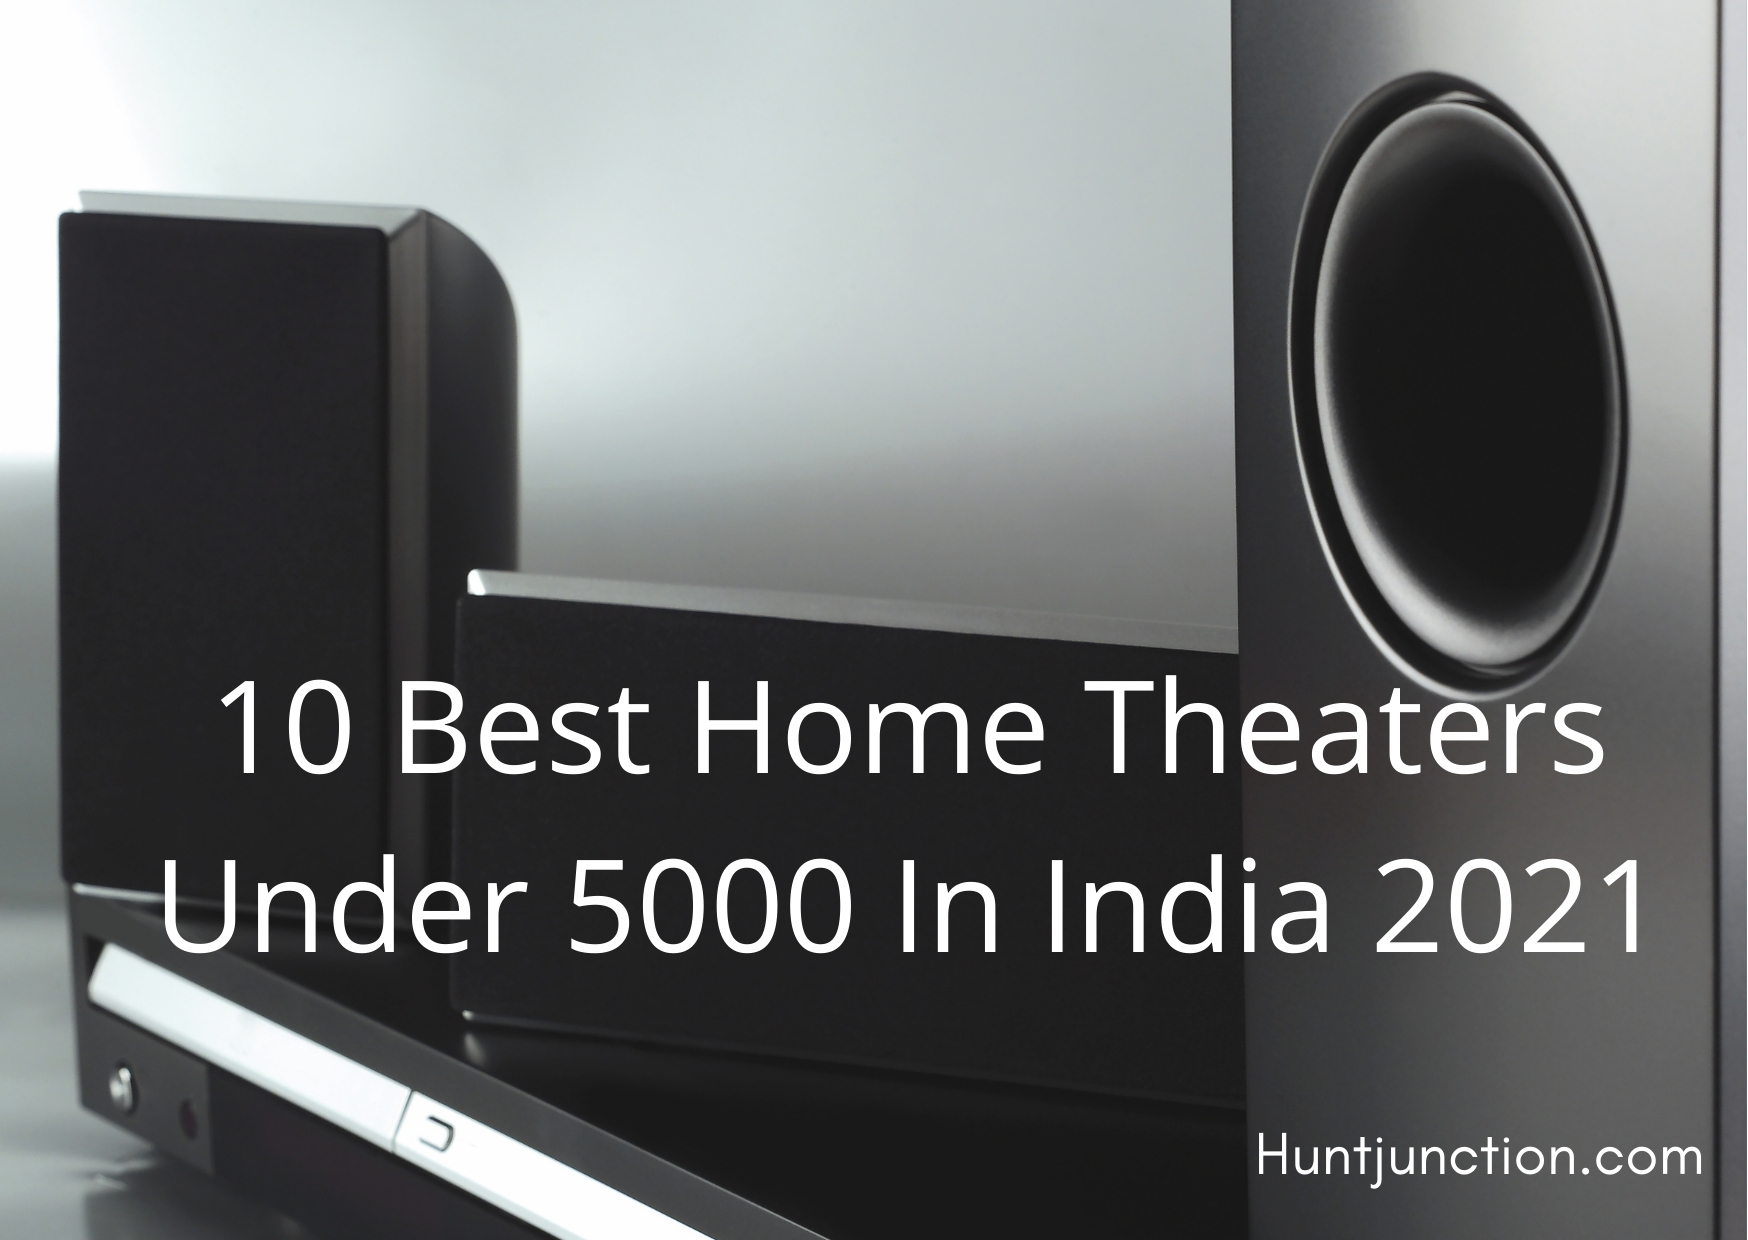 10 Best Home Theaters Under 5000 In India 2021